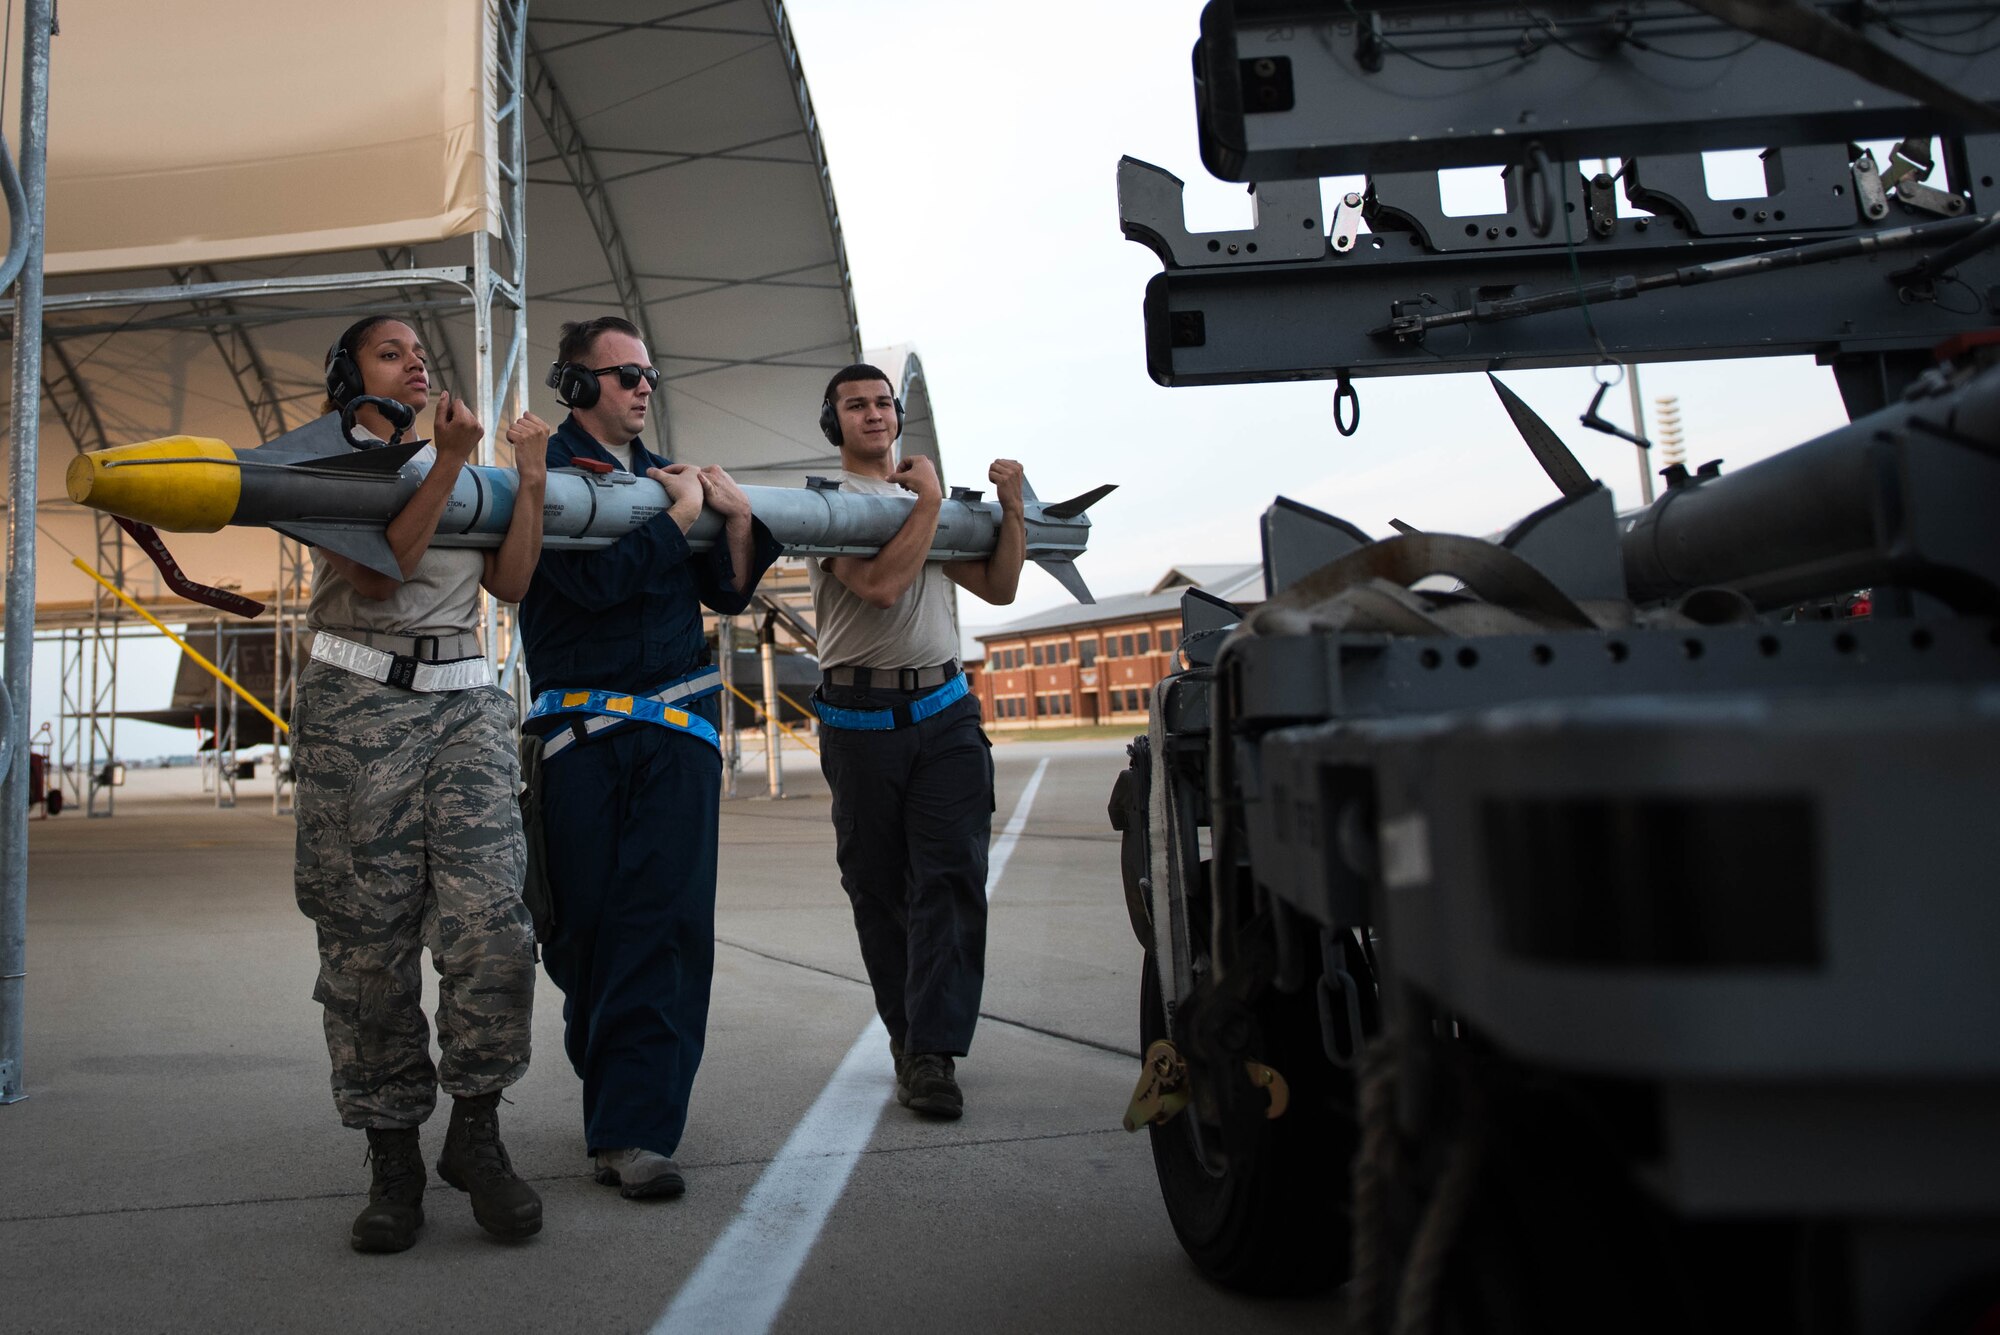 (From Left) U.S Air Force Airman First Classes Dianna King and Manuel Garcia, and Staff Sgt. Jonathan Deacon, 1st Aircraft Maintenance Squadron weapons load crew team members, load munitions onto a munitions cart during night operations at Joint Base Langley-Eustis, Va., July 11, 2017. Night operations give all squadrons a chance to perfect their skills and movement in a nighttime environment. (U.S. Air Force photo/Staff Sgt. Carlin Leslie)